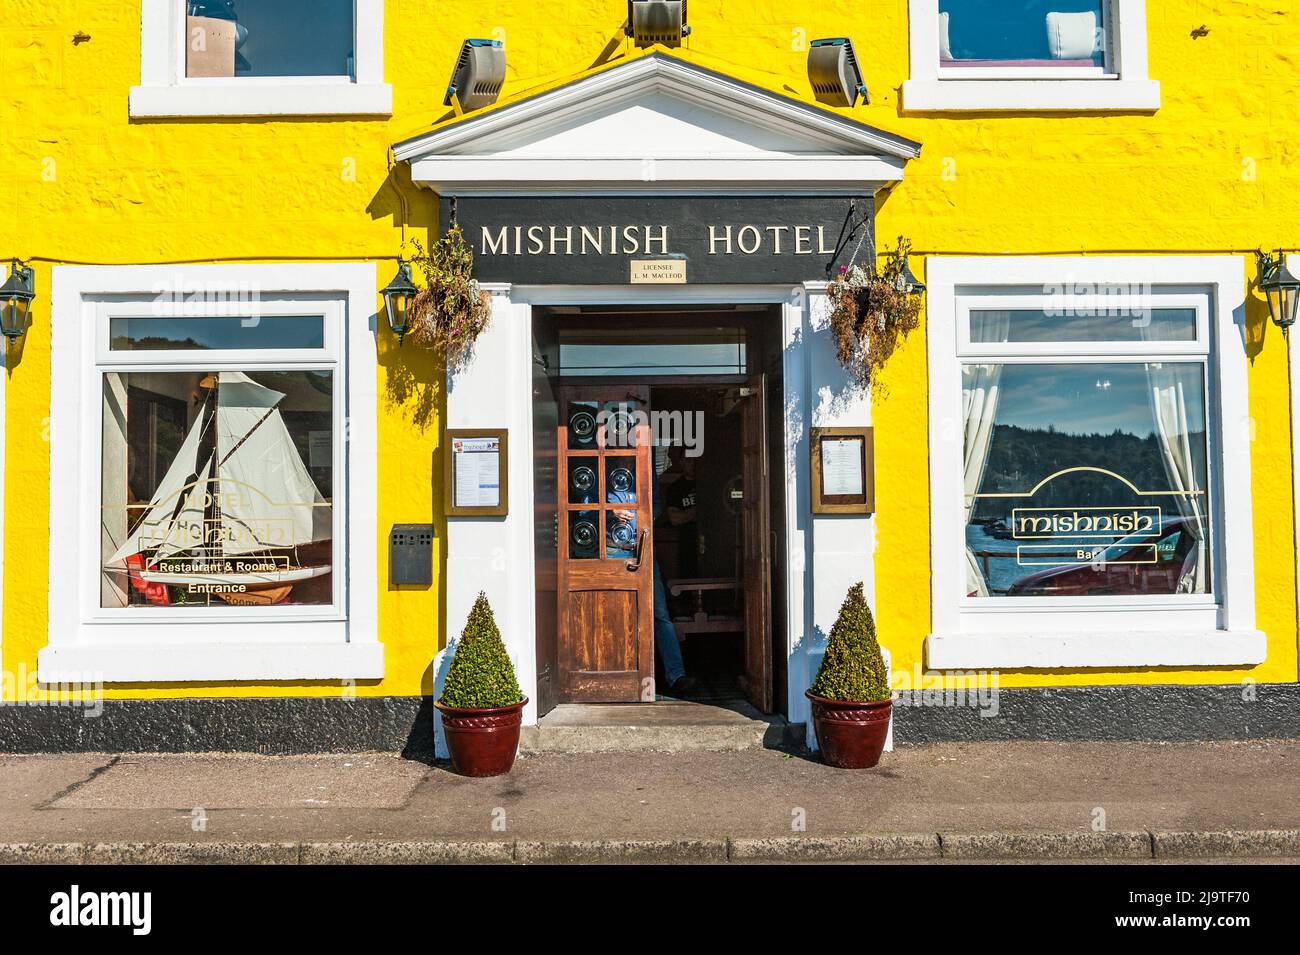 The Mishnish Hotel on the quayside at Tobermory on The isle of Mull, Scotland Stock Photo